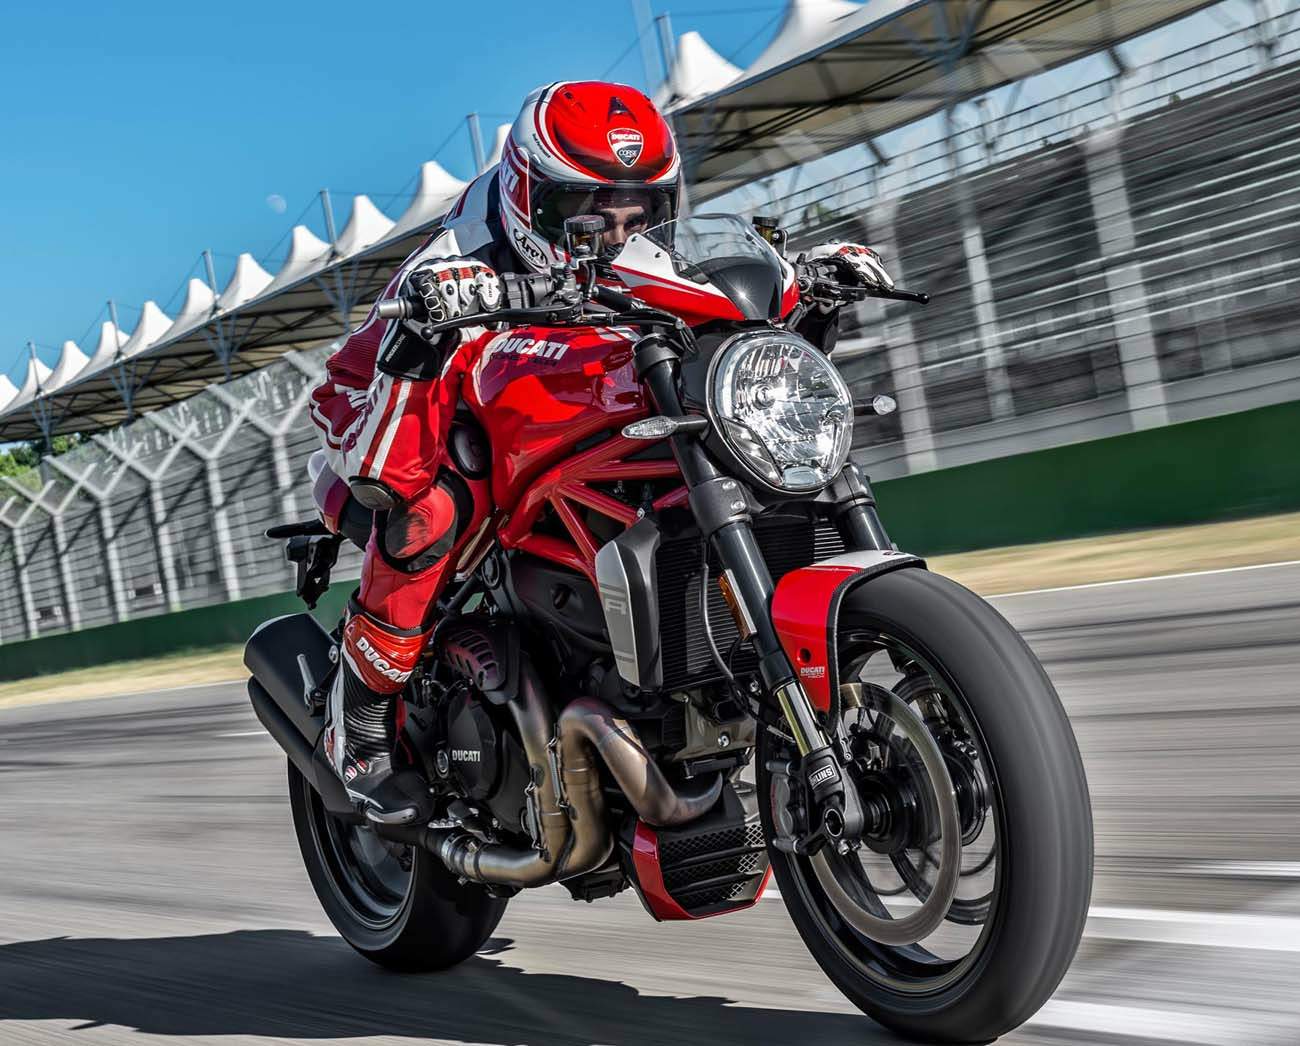 Ducati Monster 1200R technical specifications